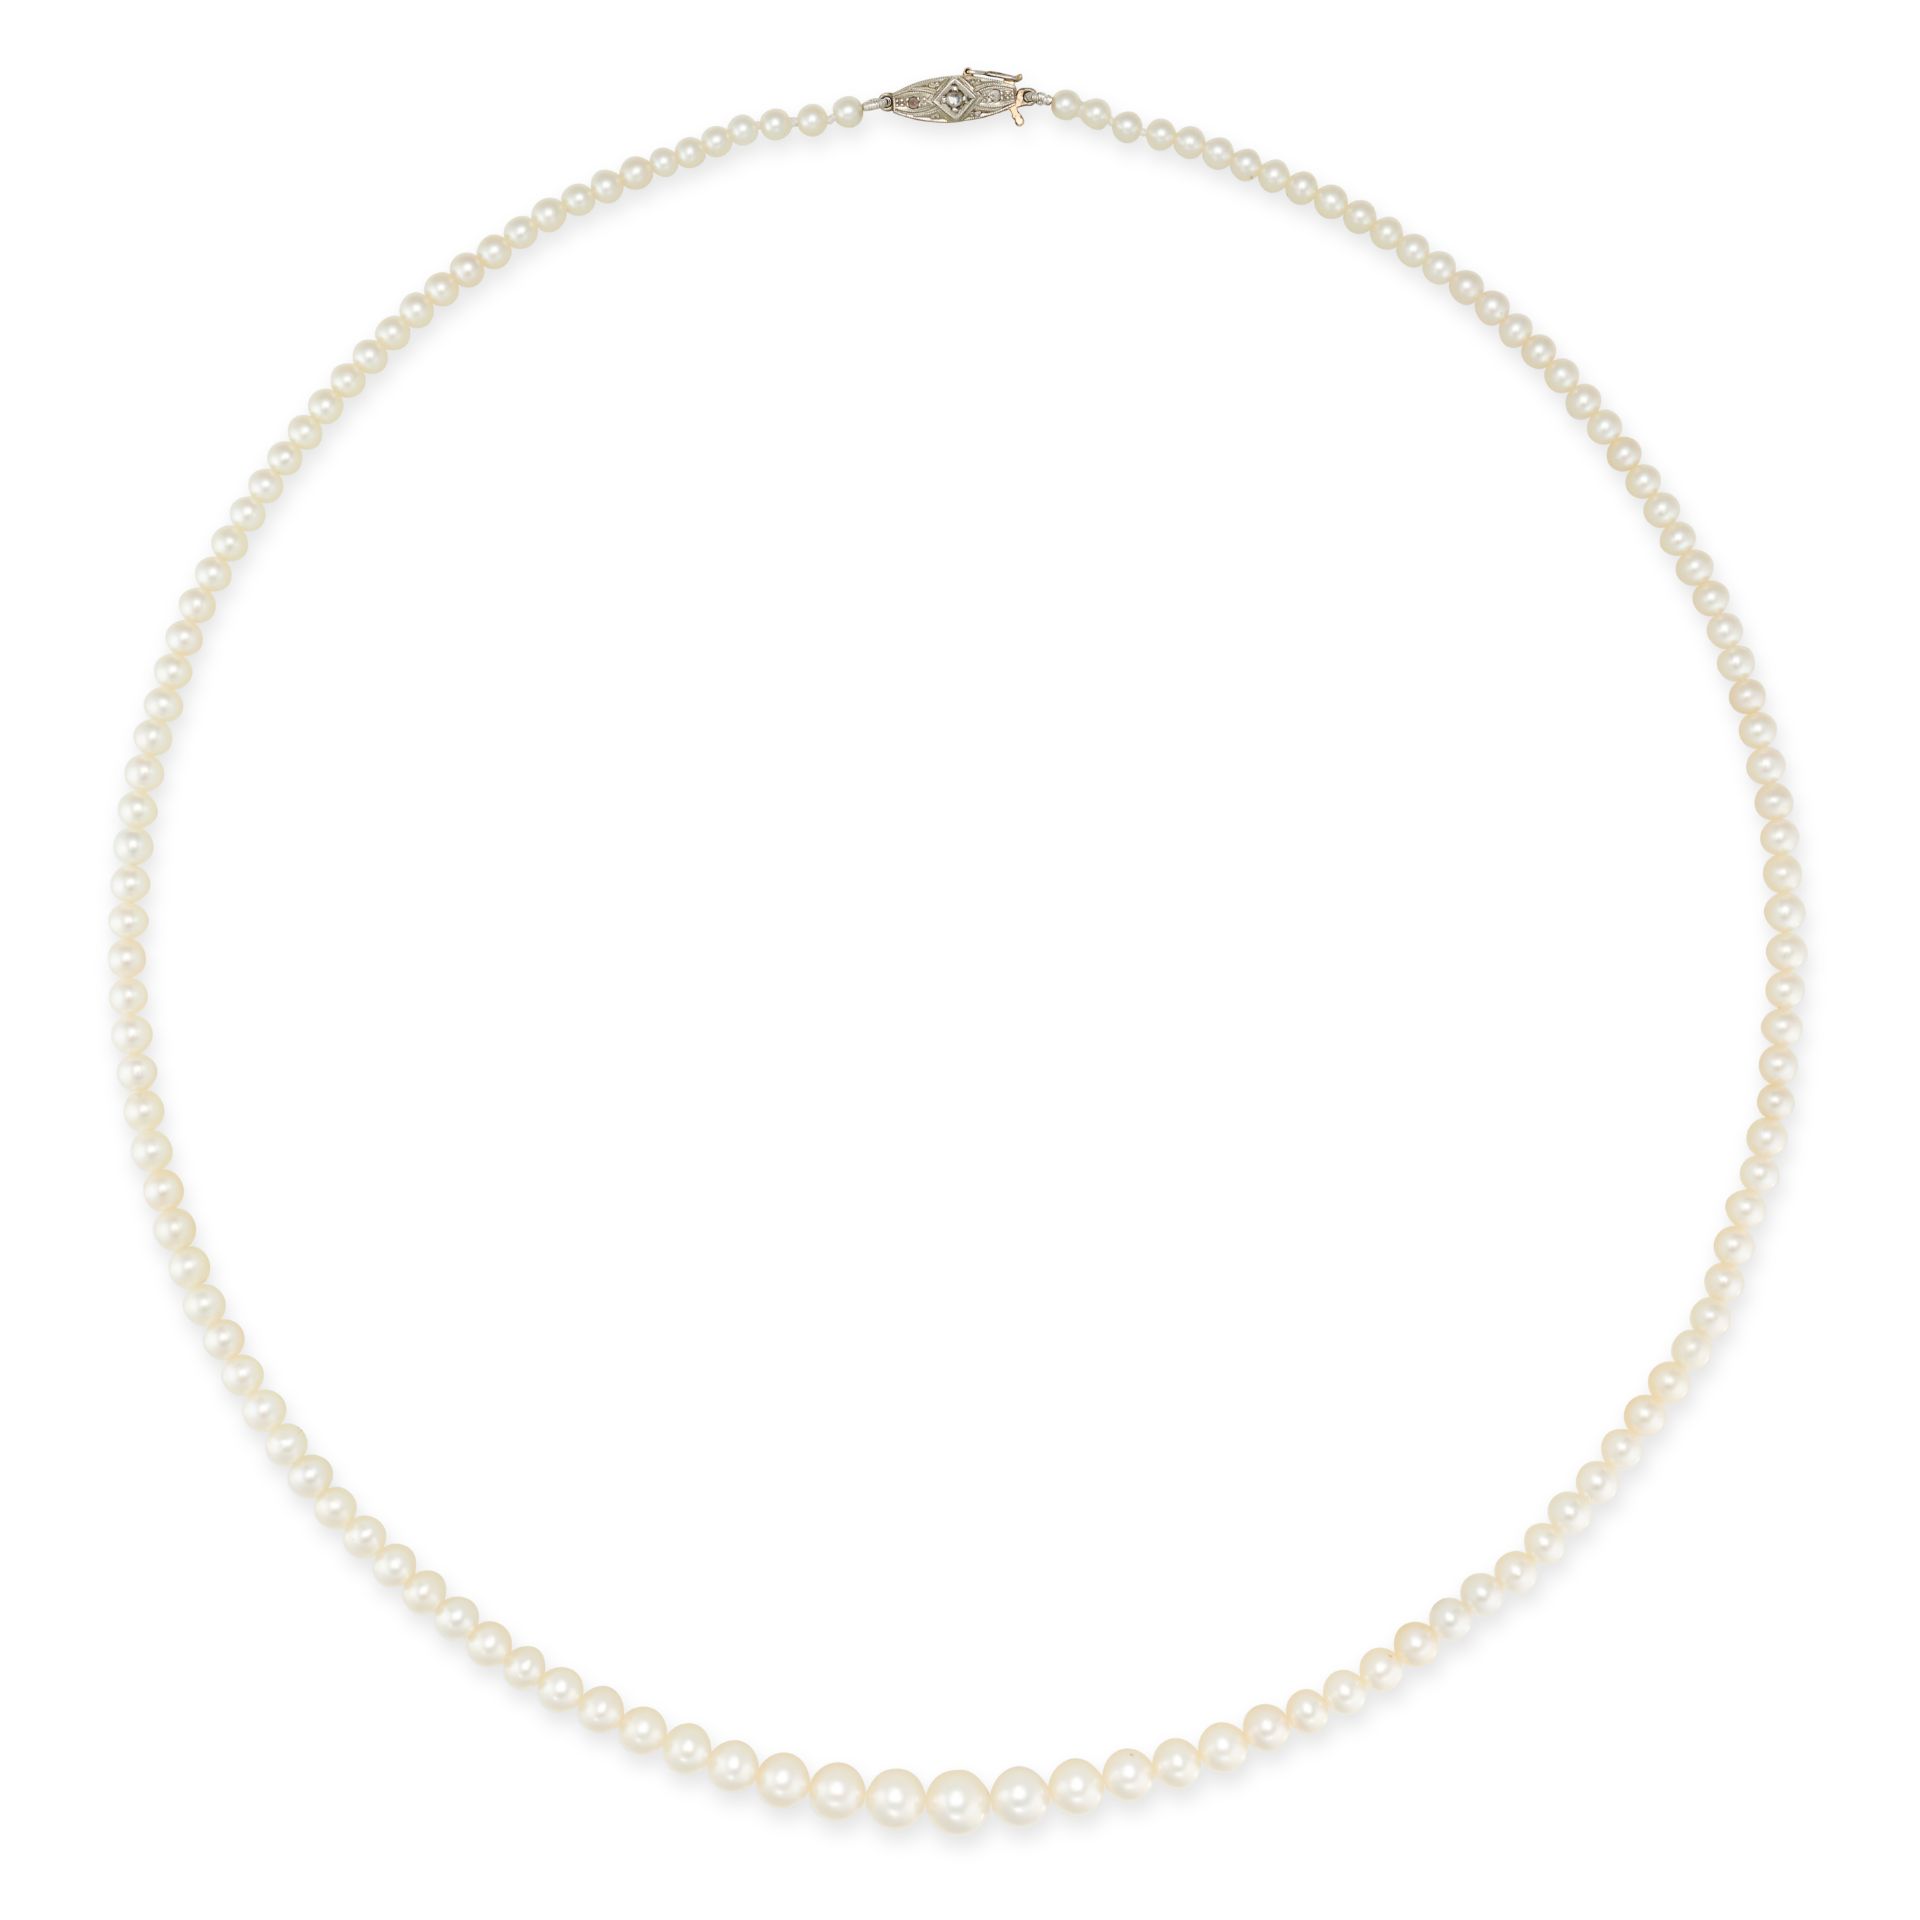 A NATURAL SALTWATER PEARL AND DIAMOND NECKLACE in yellow gold, comprising a single row of natural...